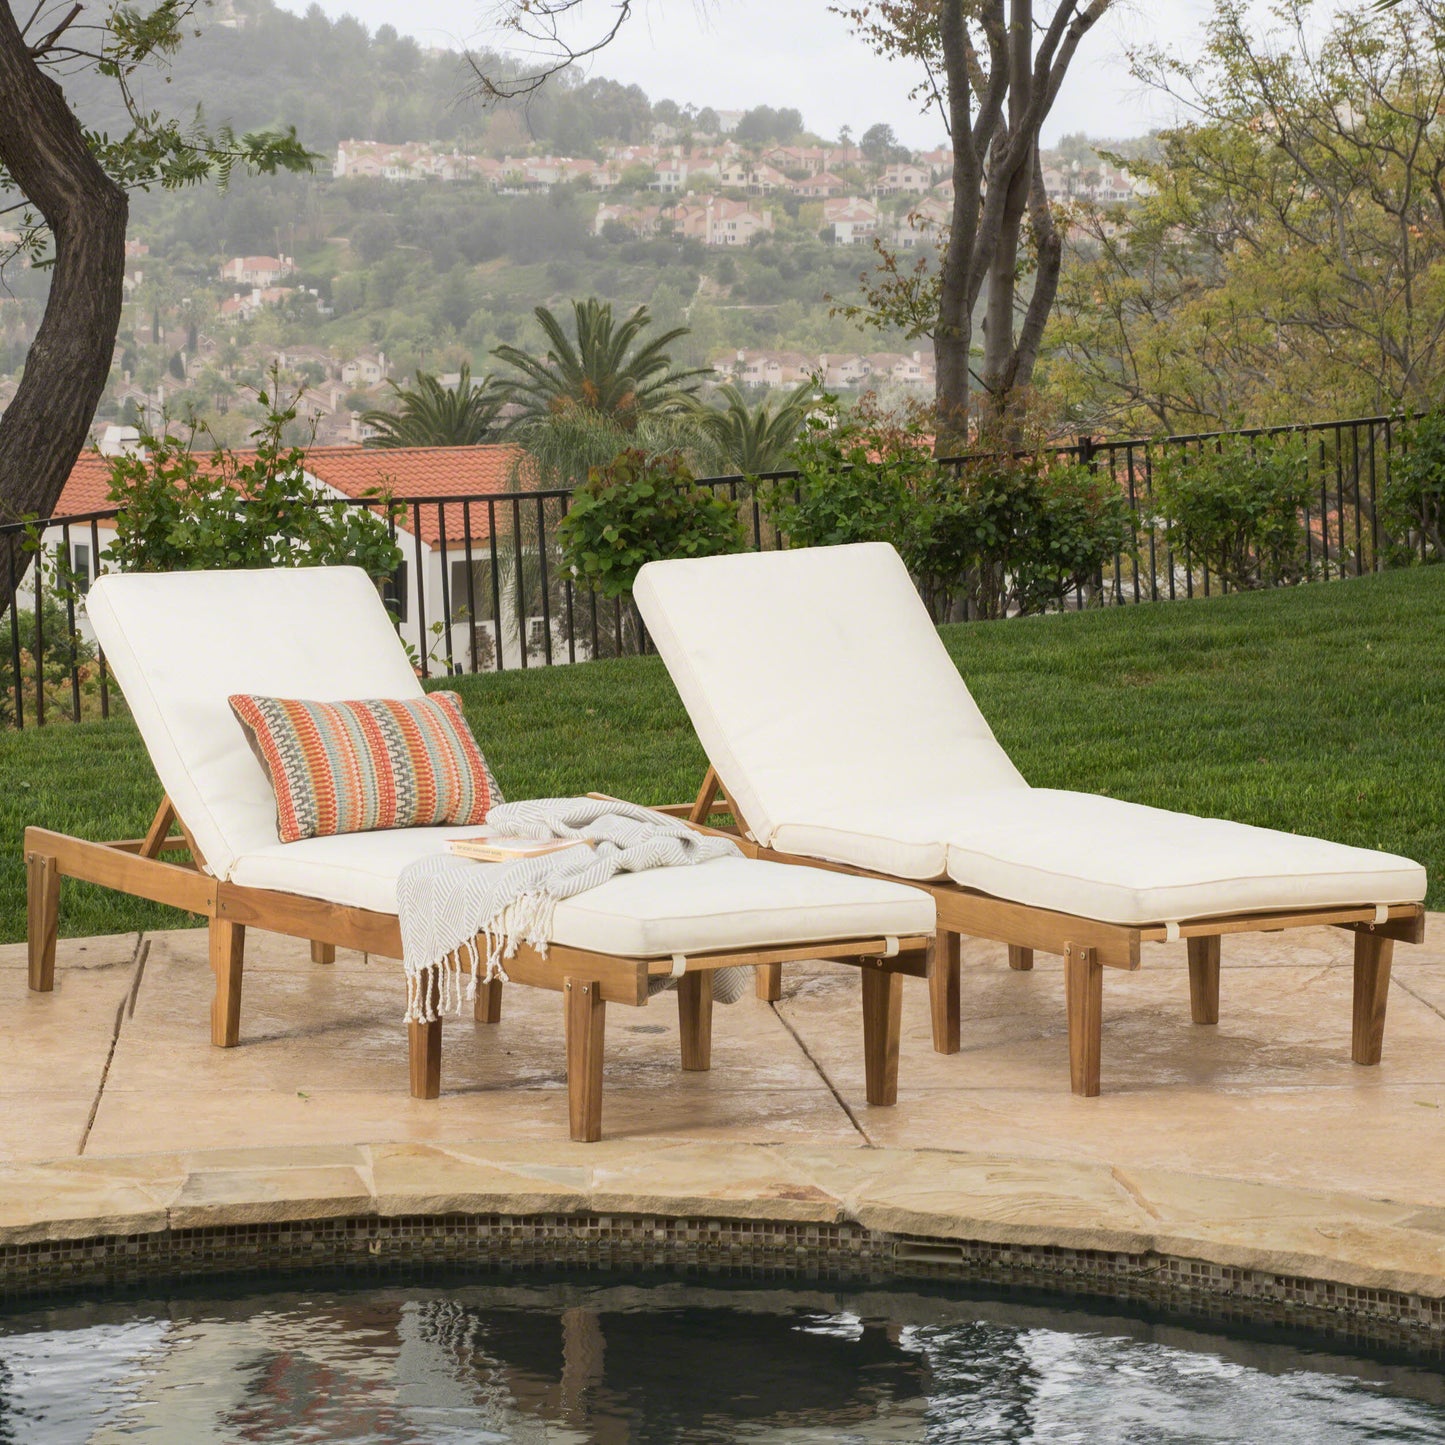 Paolo Outdoor Teak Brown Wood Chaise Lounge with Cushion